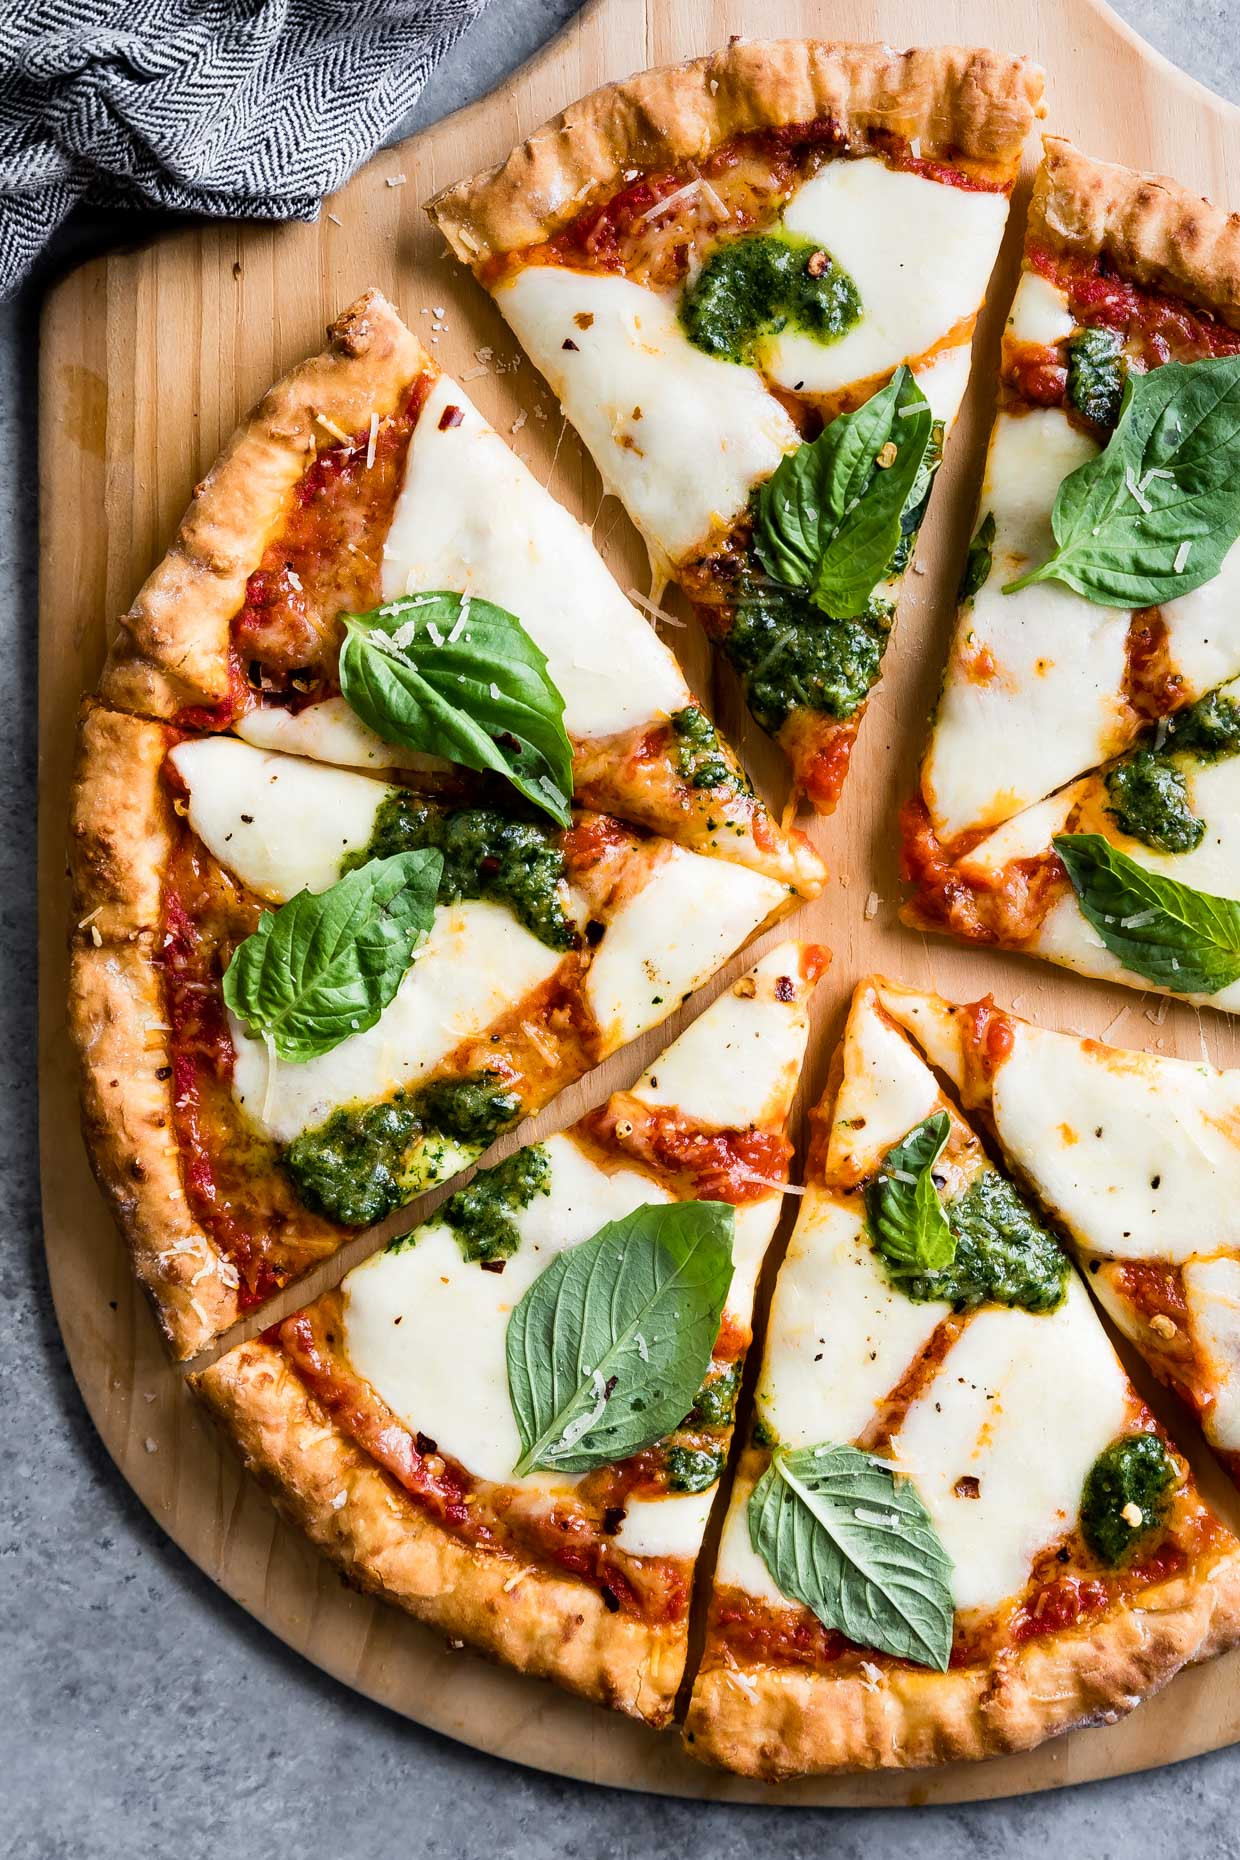 Gluten Free Pizza Recipes
 8 Exceptional Pizza Recipes for Sharing at Your Table